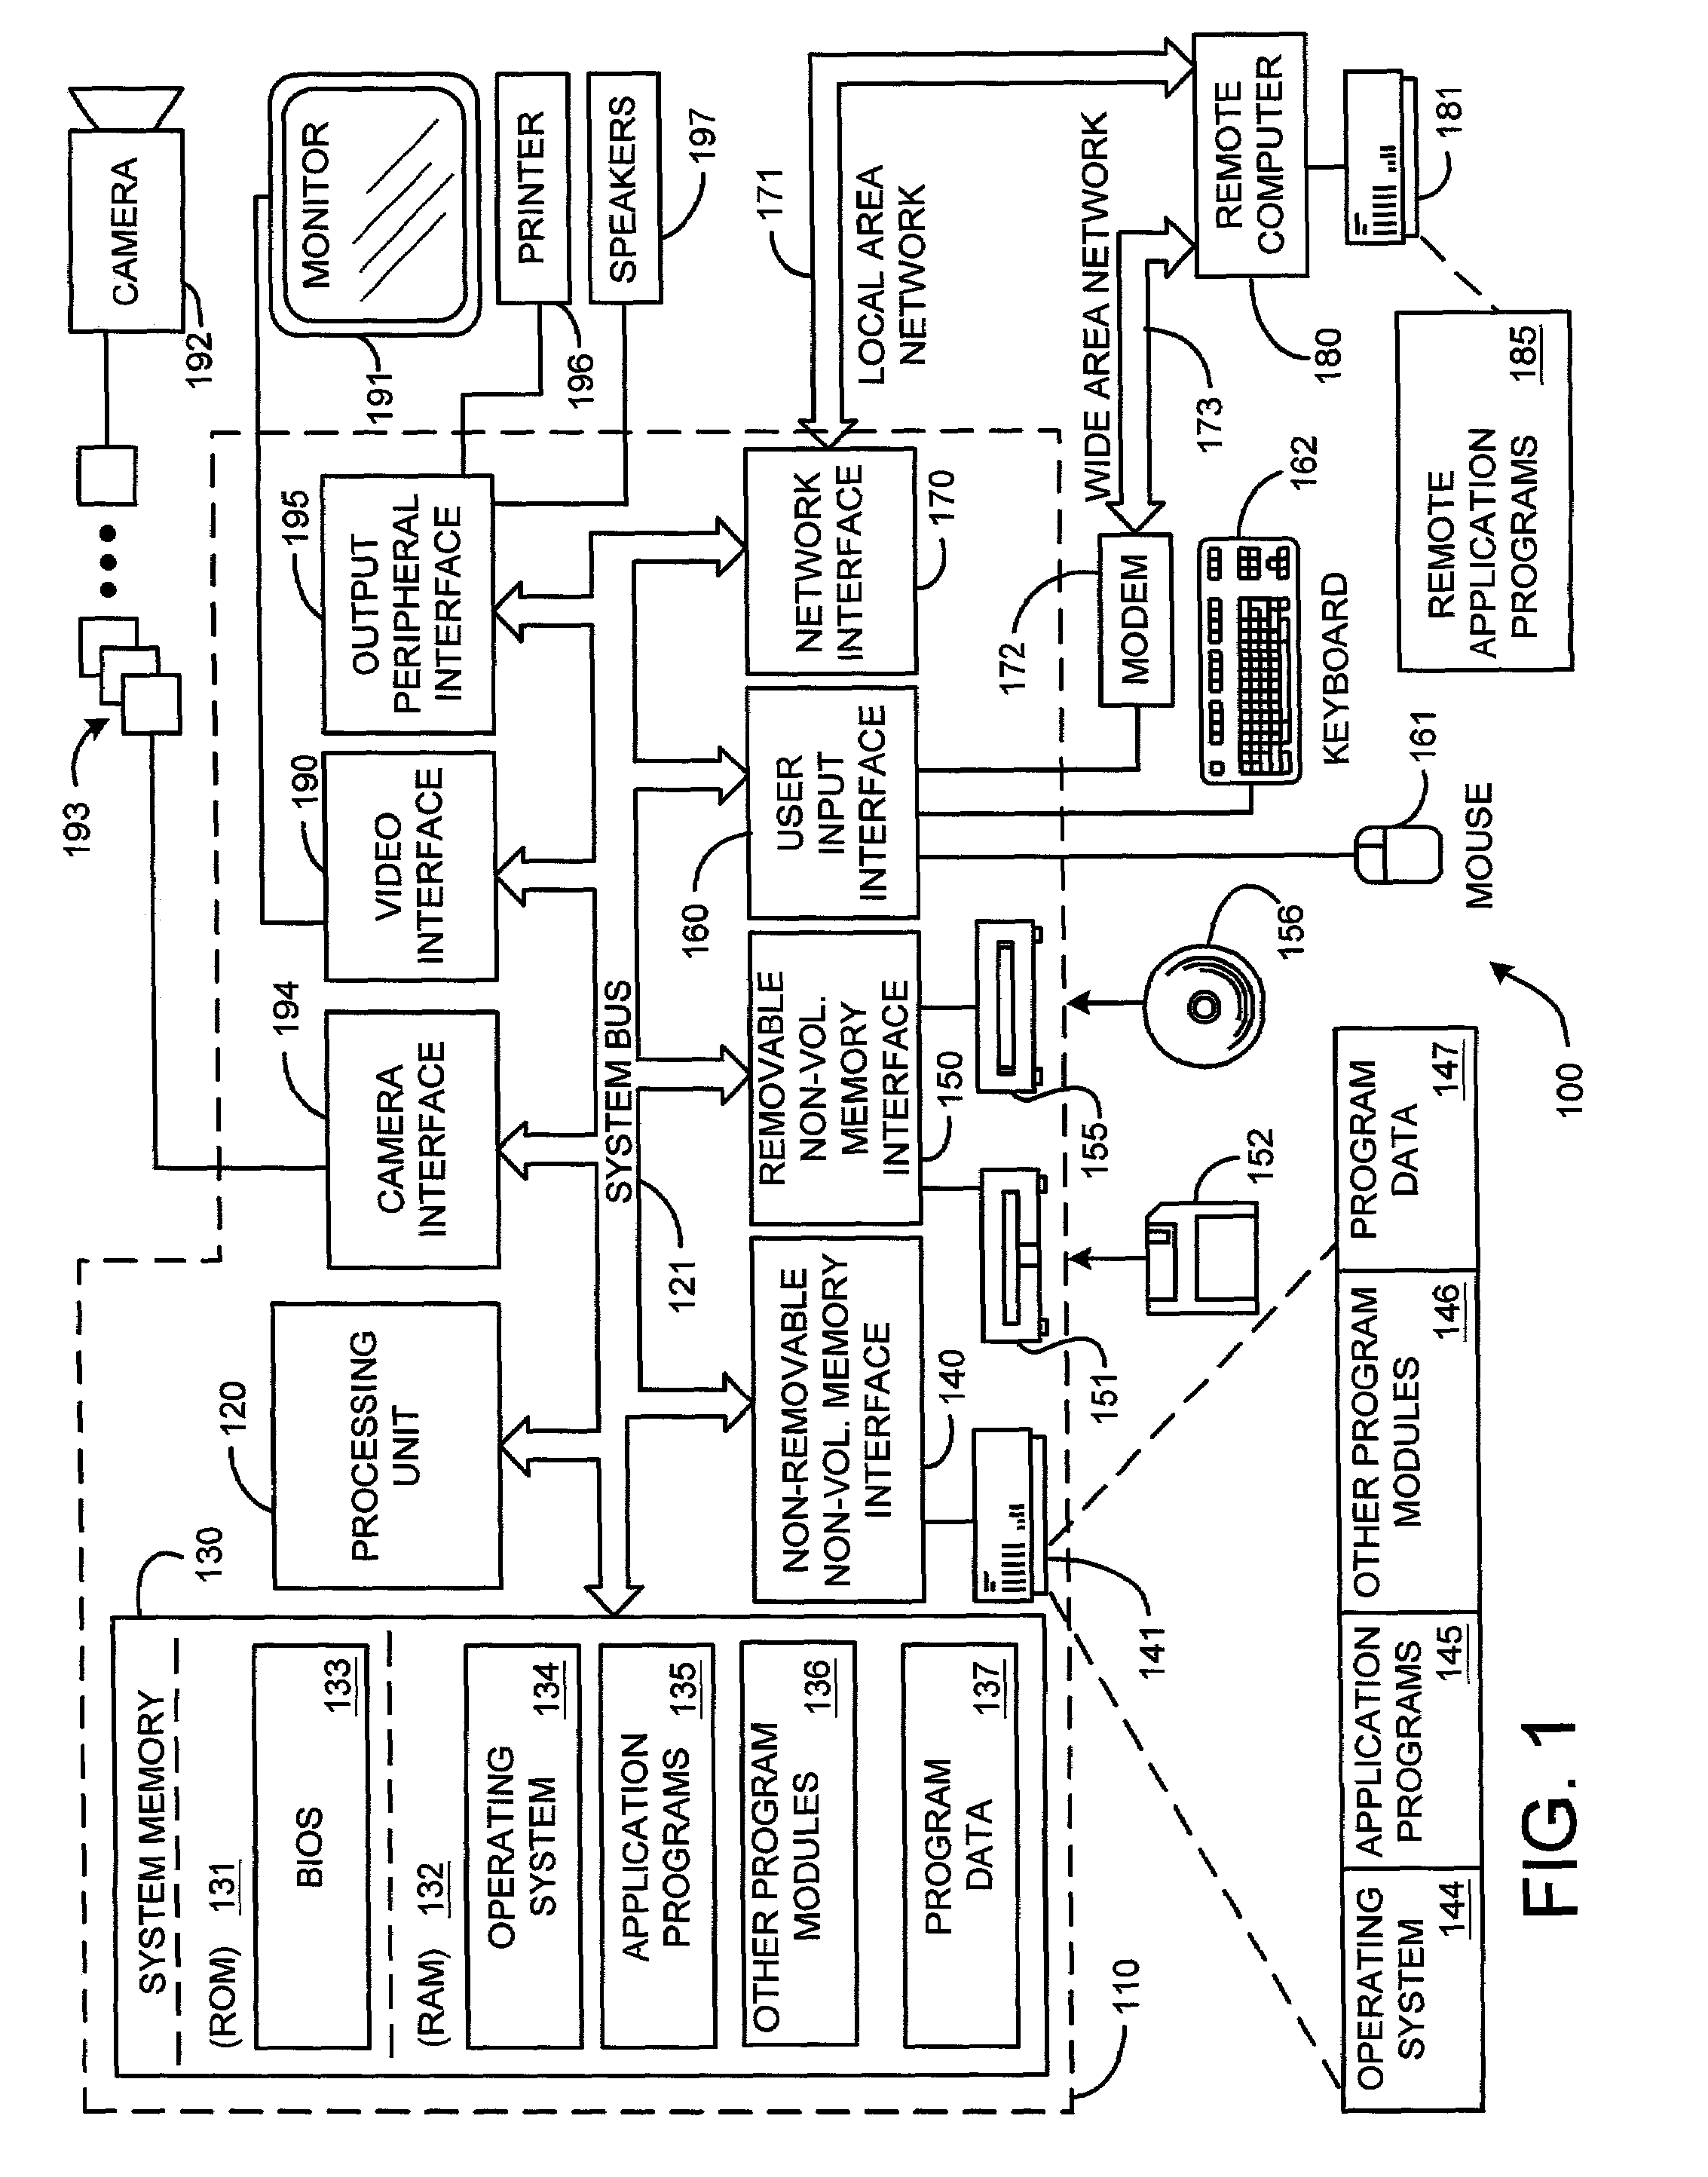 System and method for multi-view face detection